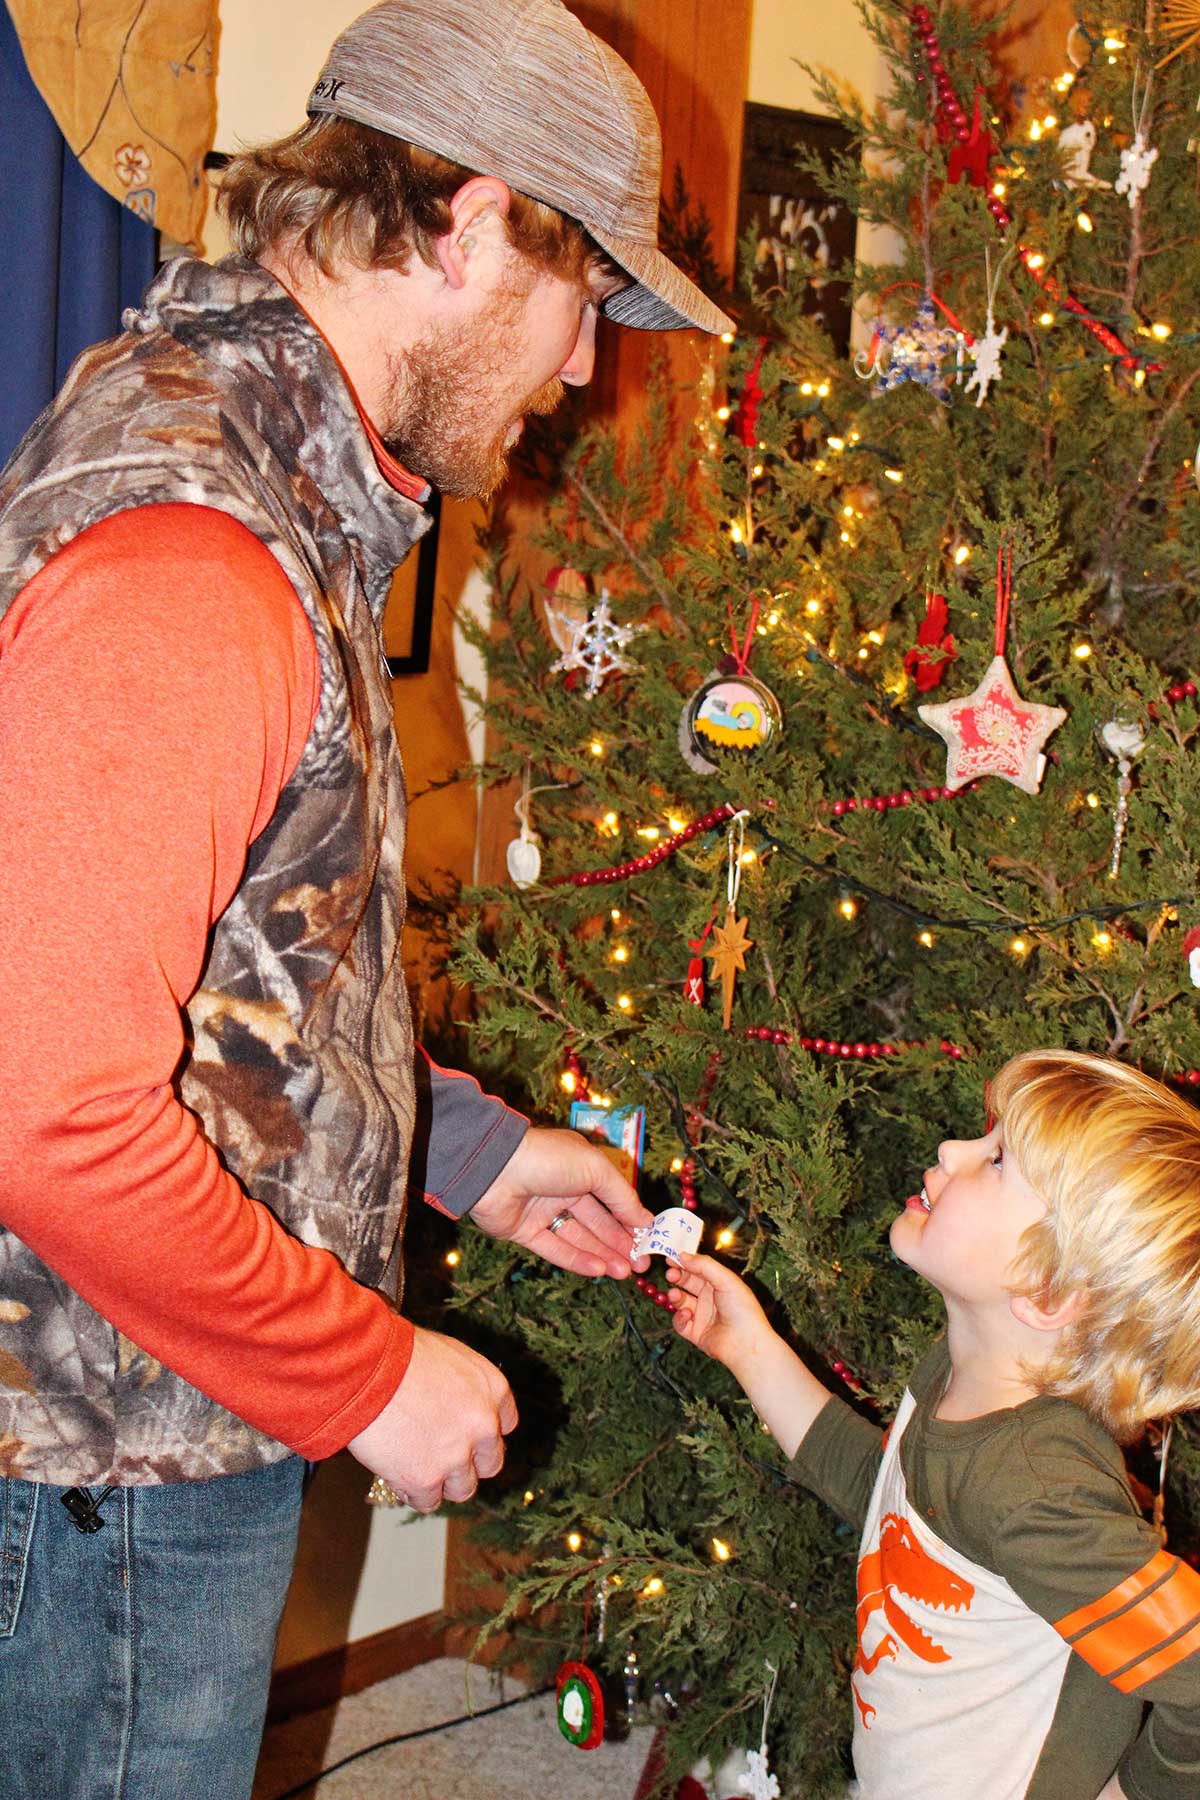 Man in camp vest and hat and young boy with blonde hair hold a clue in front of a decorated Christmas tree.